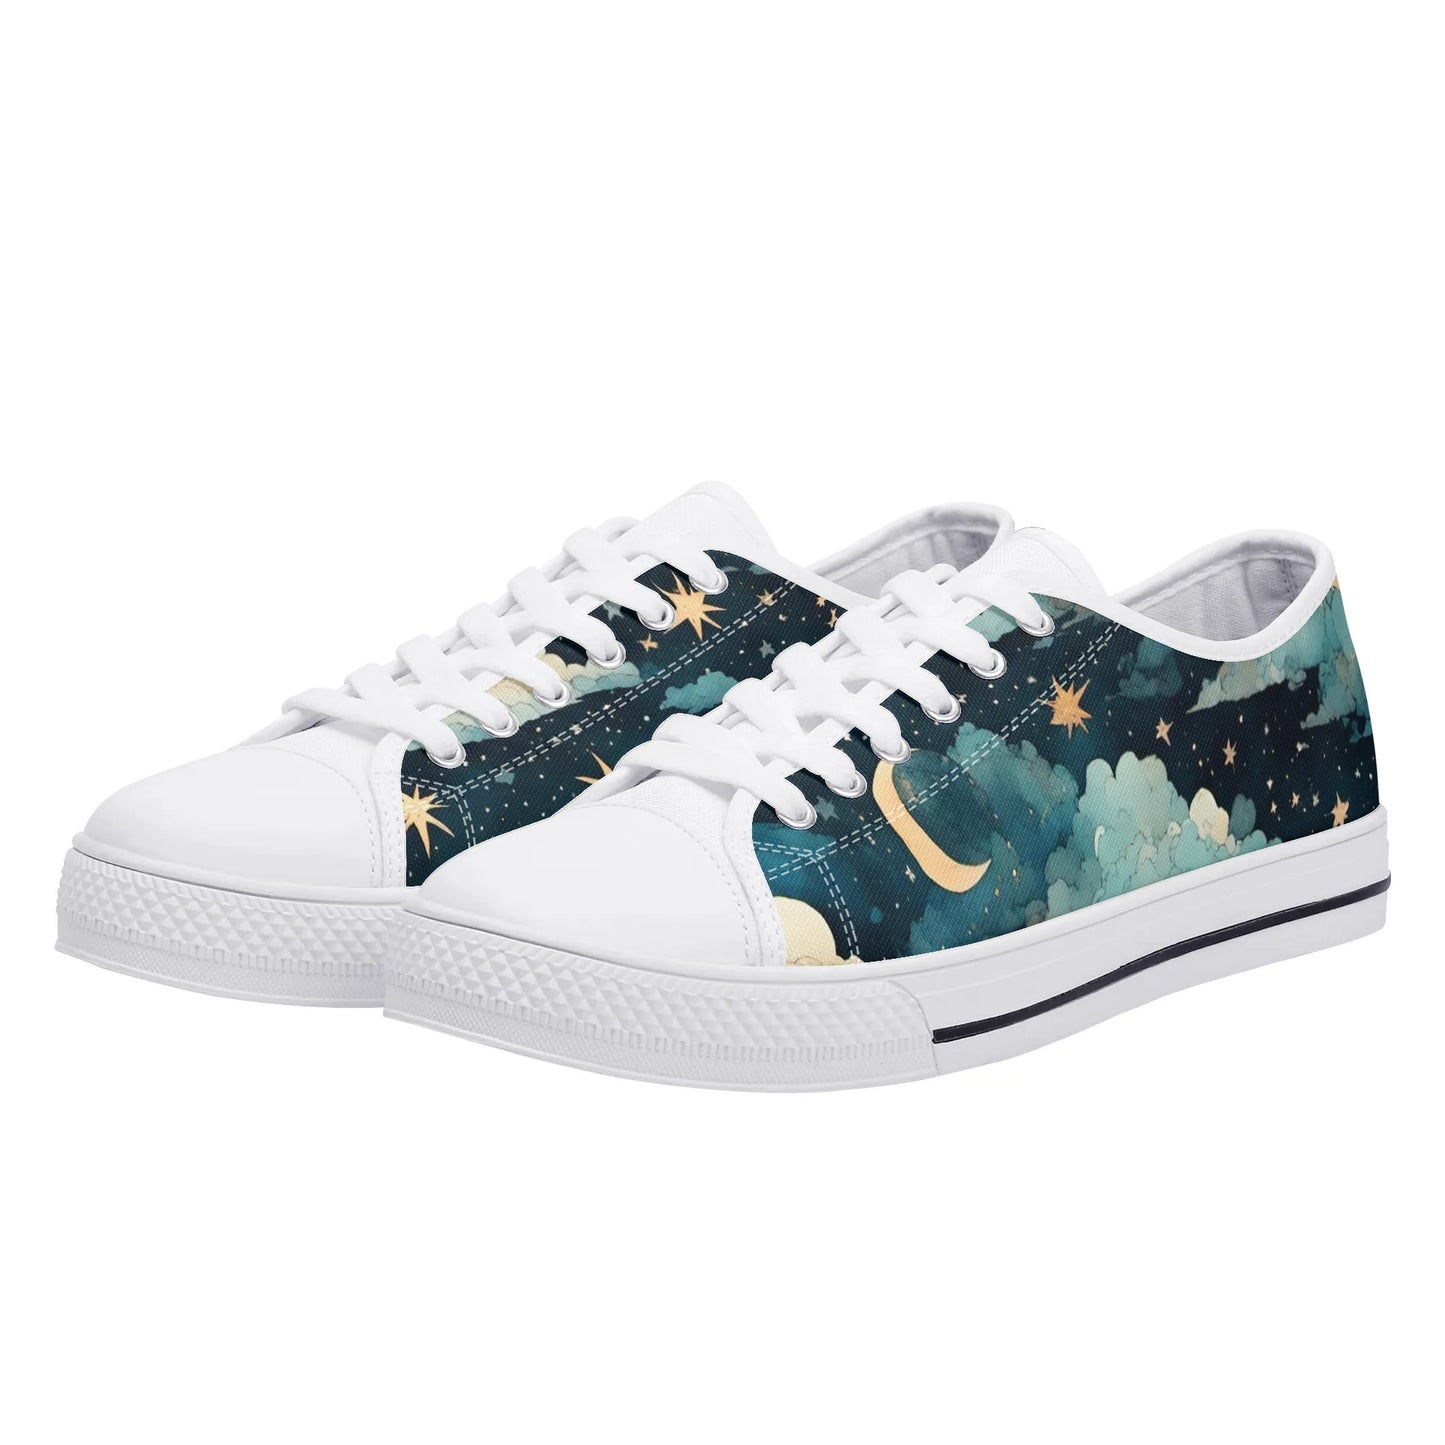 Celestial Blue Clouds Sky Womens Rubber Low Top Sneakers